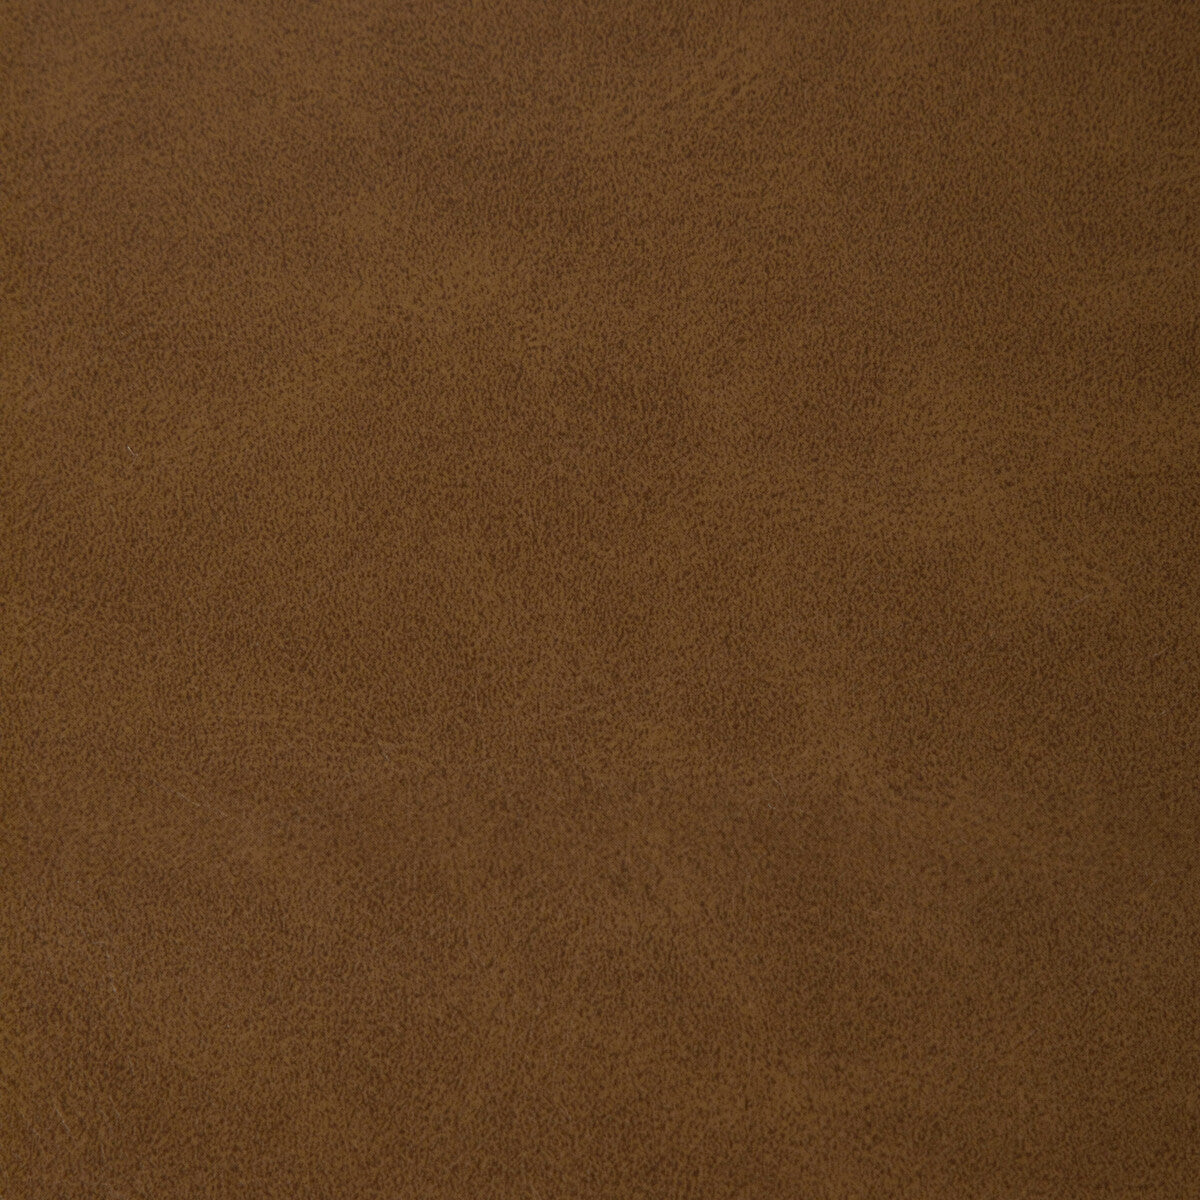 Rambler fabric in whiskey color - pattern RAMBLER.616.0 - by Kravet Contract